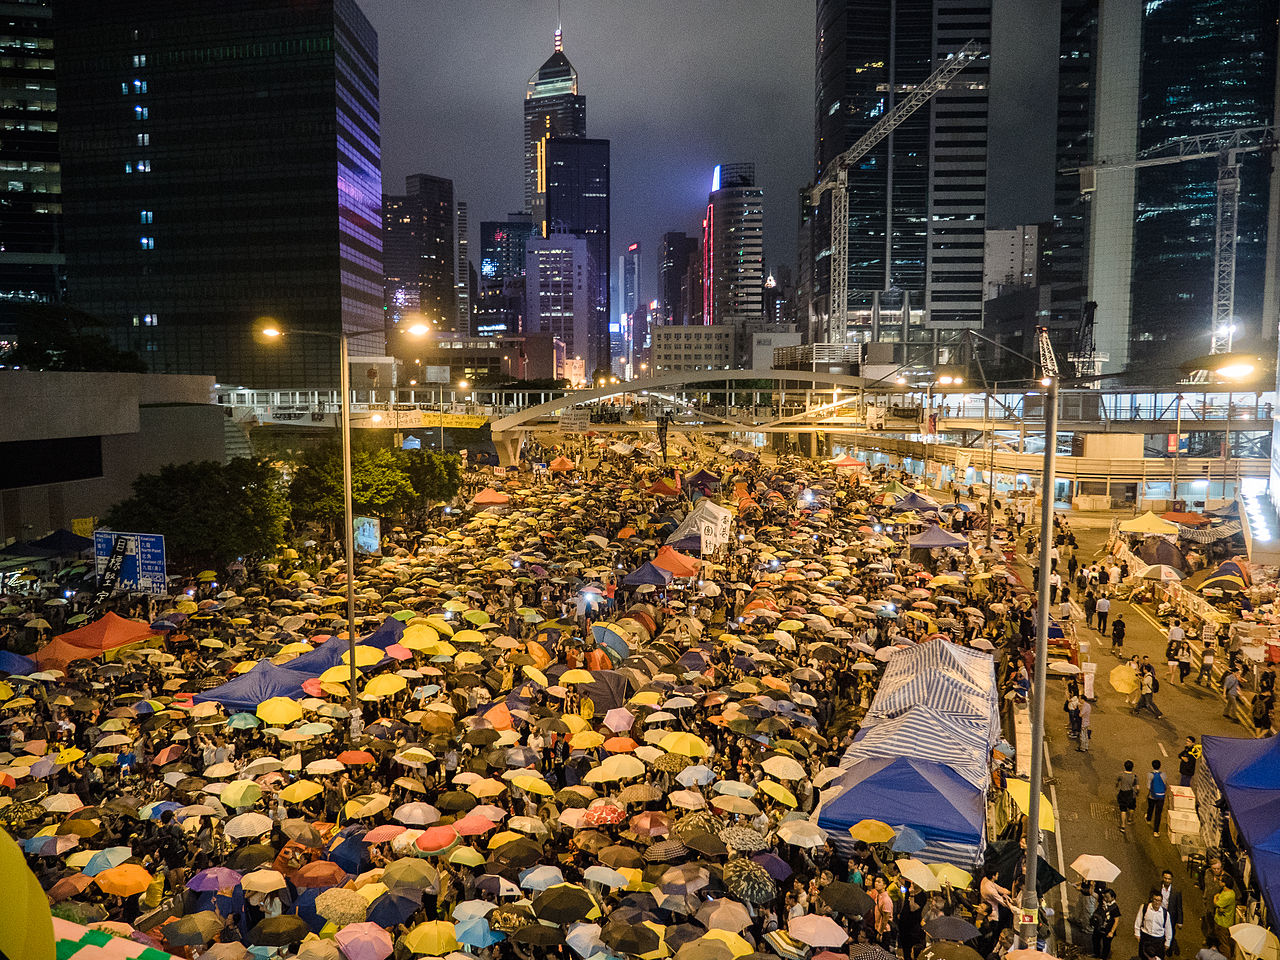 Harcourt Road in Hong Kong during the Umbrella Revolution